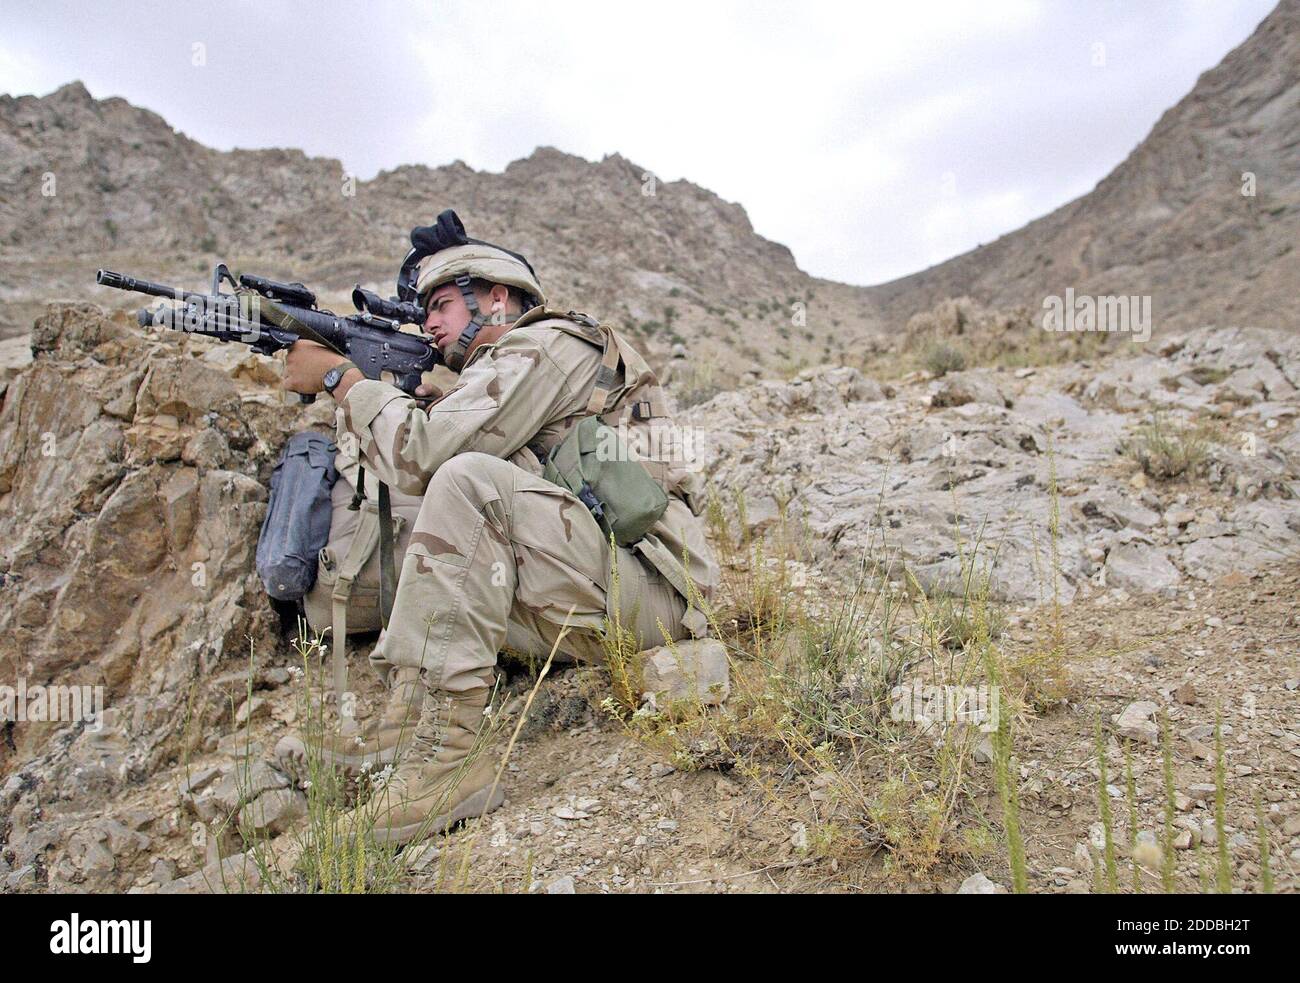 NO FILM, NO VIDEO, NO TV, NO DOCUMENTARY - Sgt. Jay Lutz, of Jarettsville, Maryland, with Battle Company, 2nd Batt. Airborne, 503rd Infantry, 173rd Airborne Brigade, scans the nearby rocks for Taliban fighters while participating in Operation Como in the Deh Chopan District of Zabul Province, Afghanistan, on August 10, 2005. Photo by Tom Pennington/Fort Worth Star-Telegram/KRT/ABACAPRESS.COM. Stock Photo